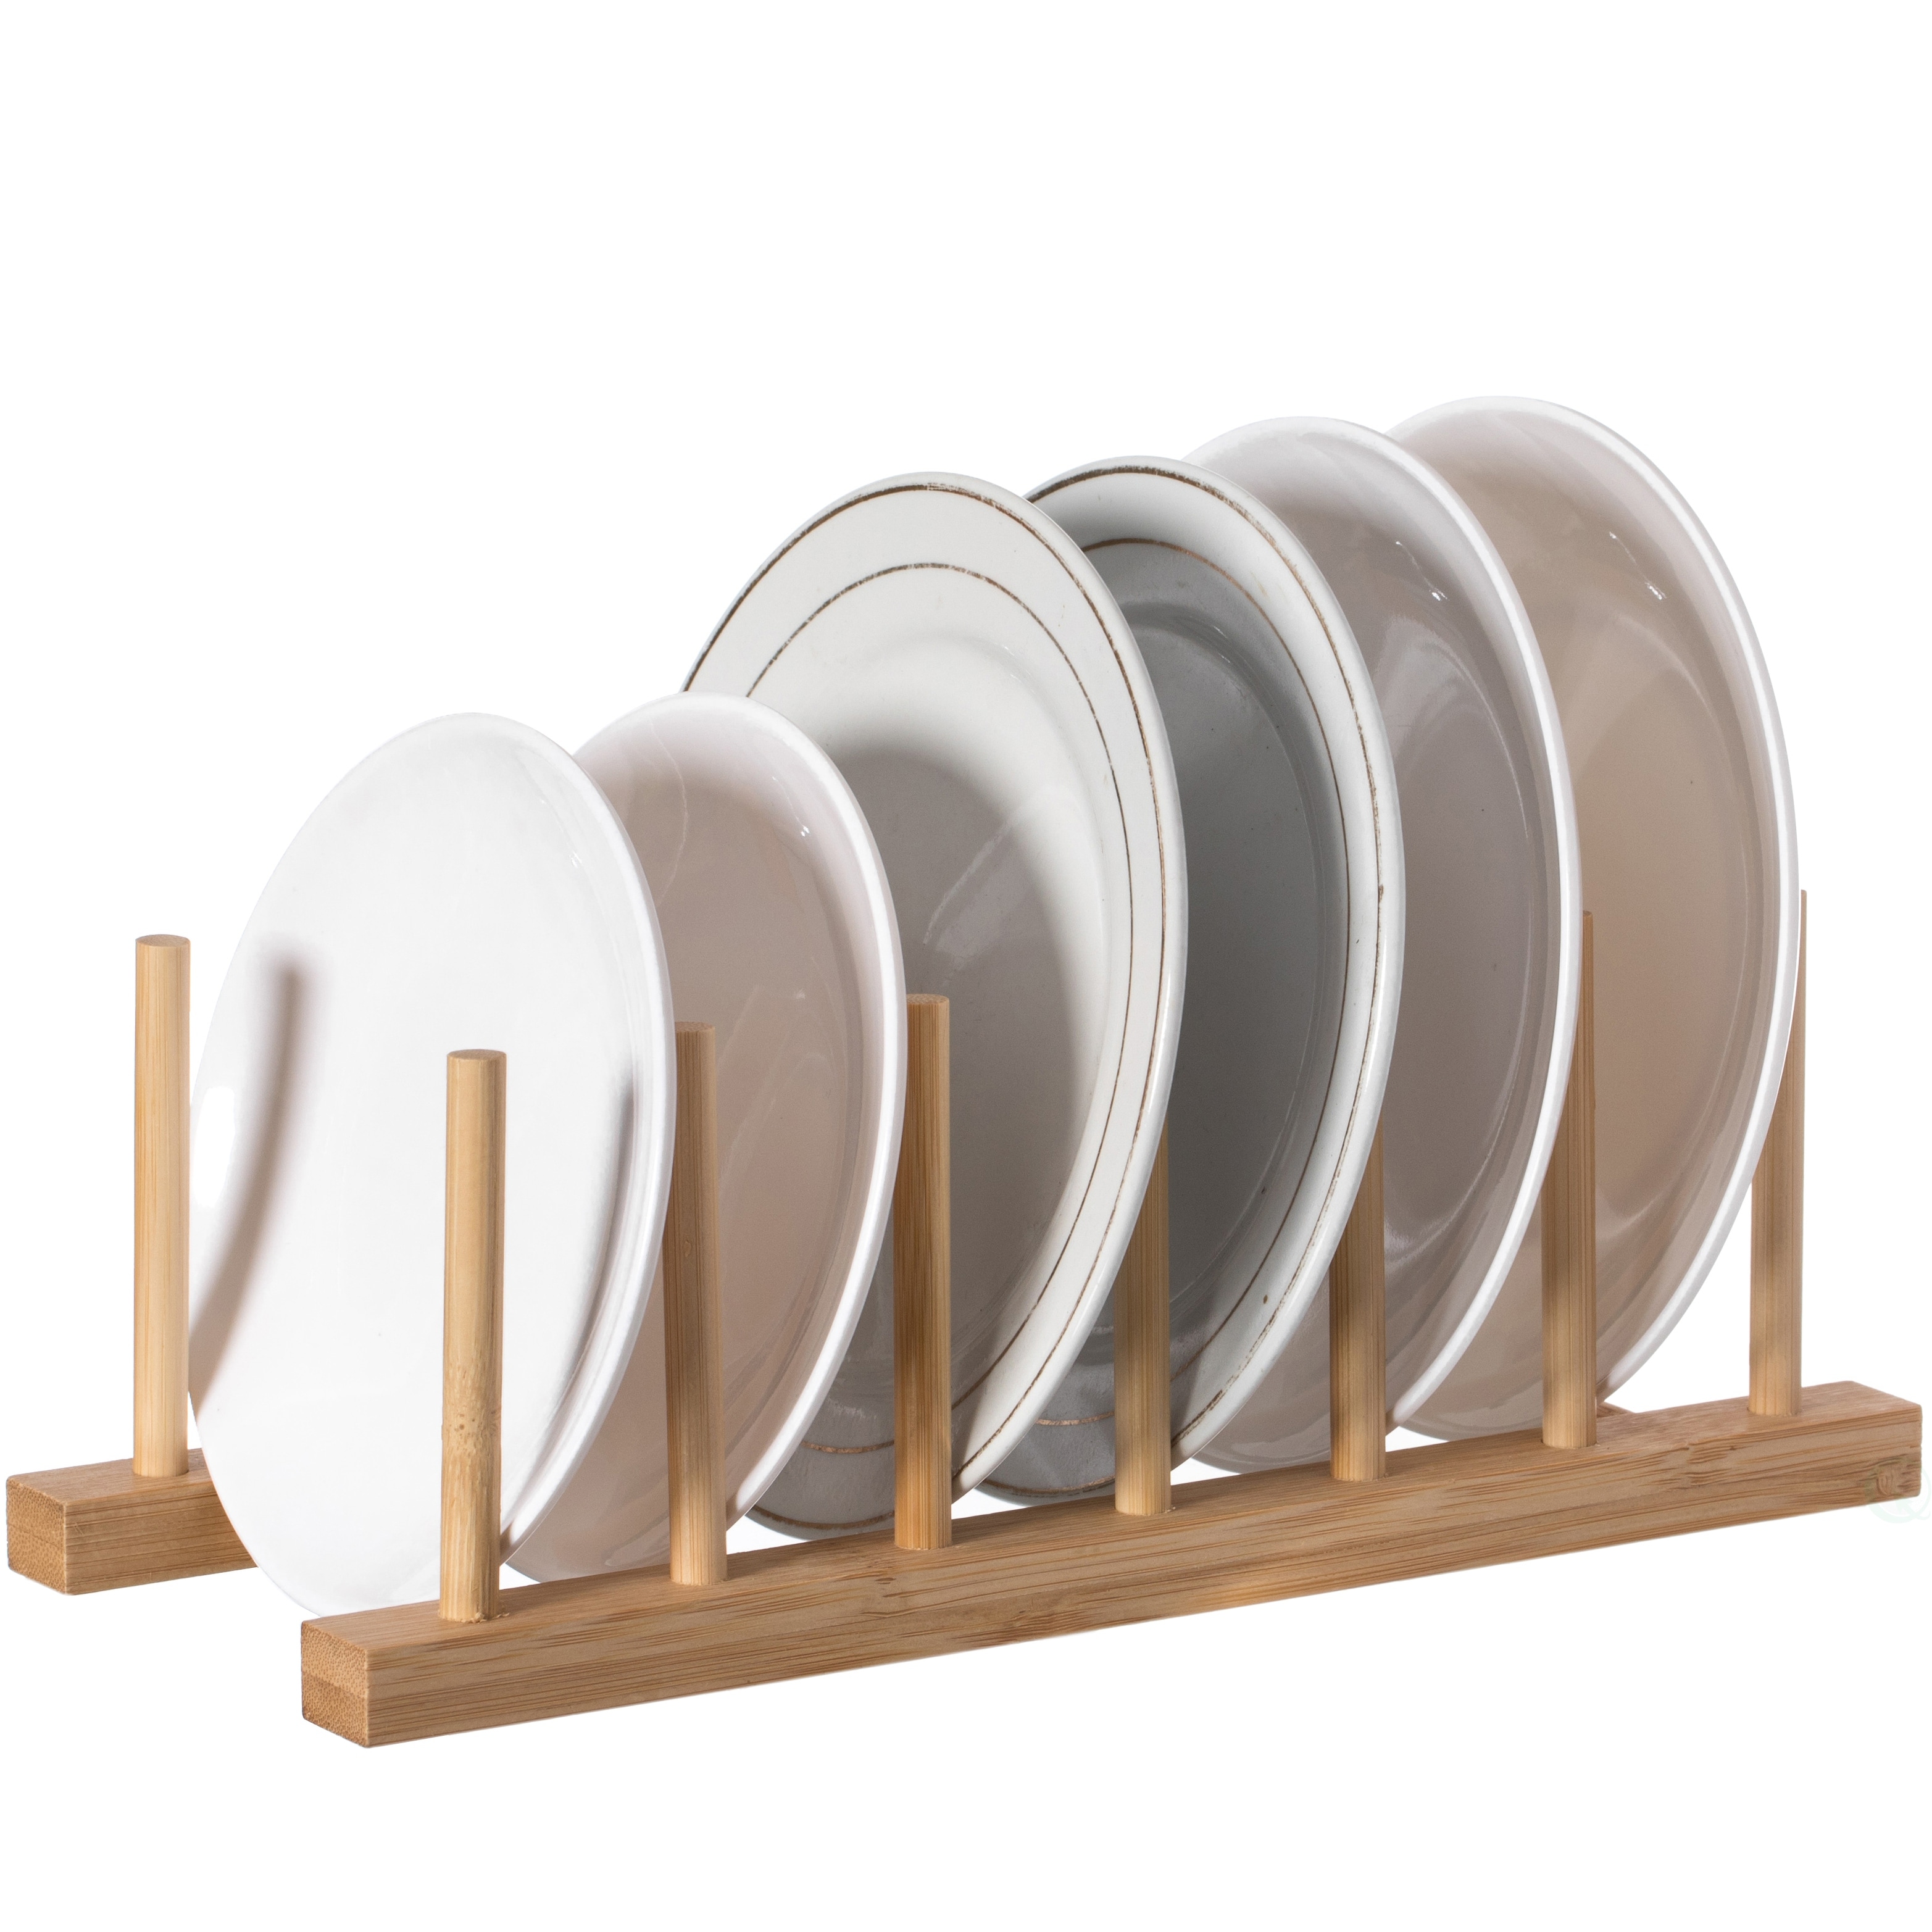 https://ak1.ostkcdn.com/images/products/is/images/direct/0531679d0d50690b77f8281902f3d4349752c5e8/Set-of-2-Bamboo-Wooden-Dish-Drainer-Rack%2C-Plate-Rack%2C-And-Drying-Drainer.jpg